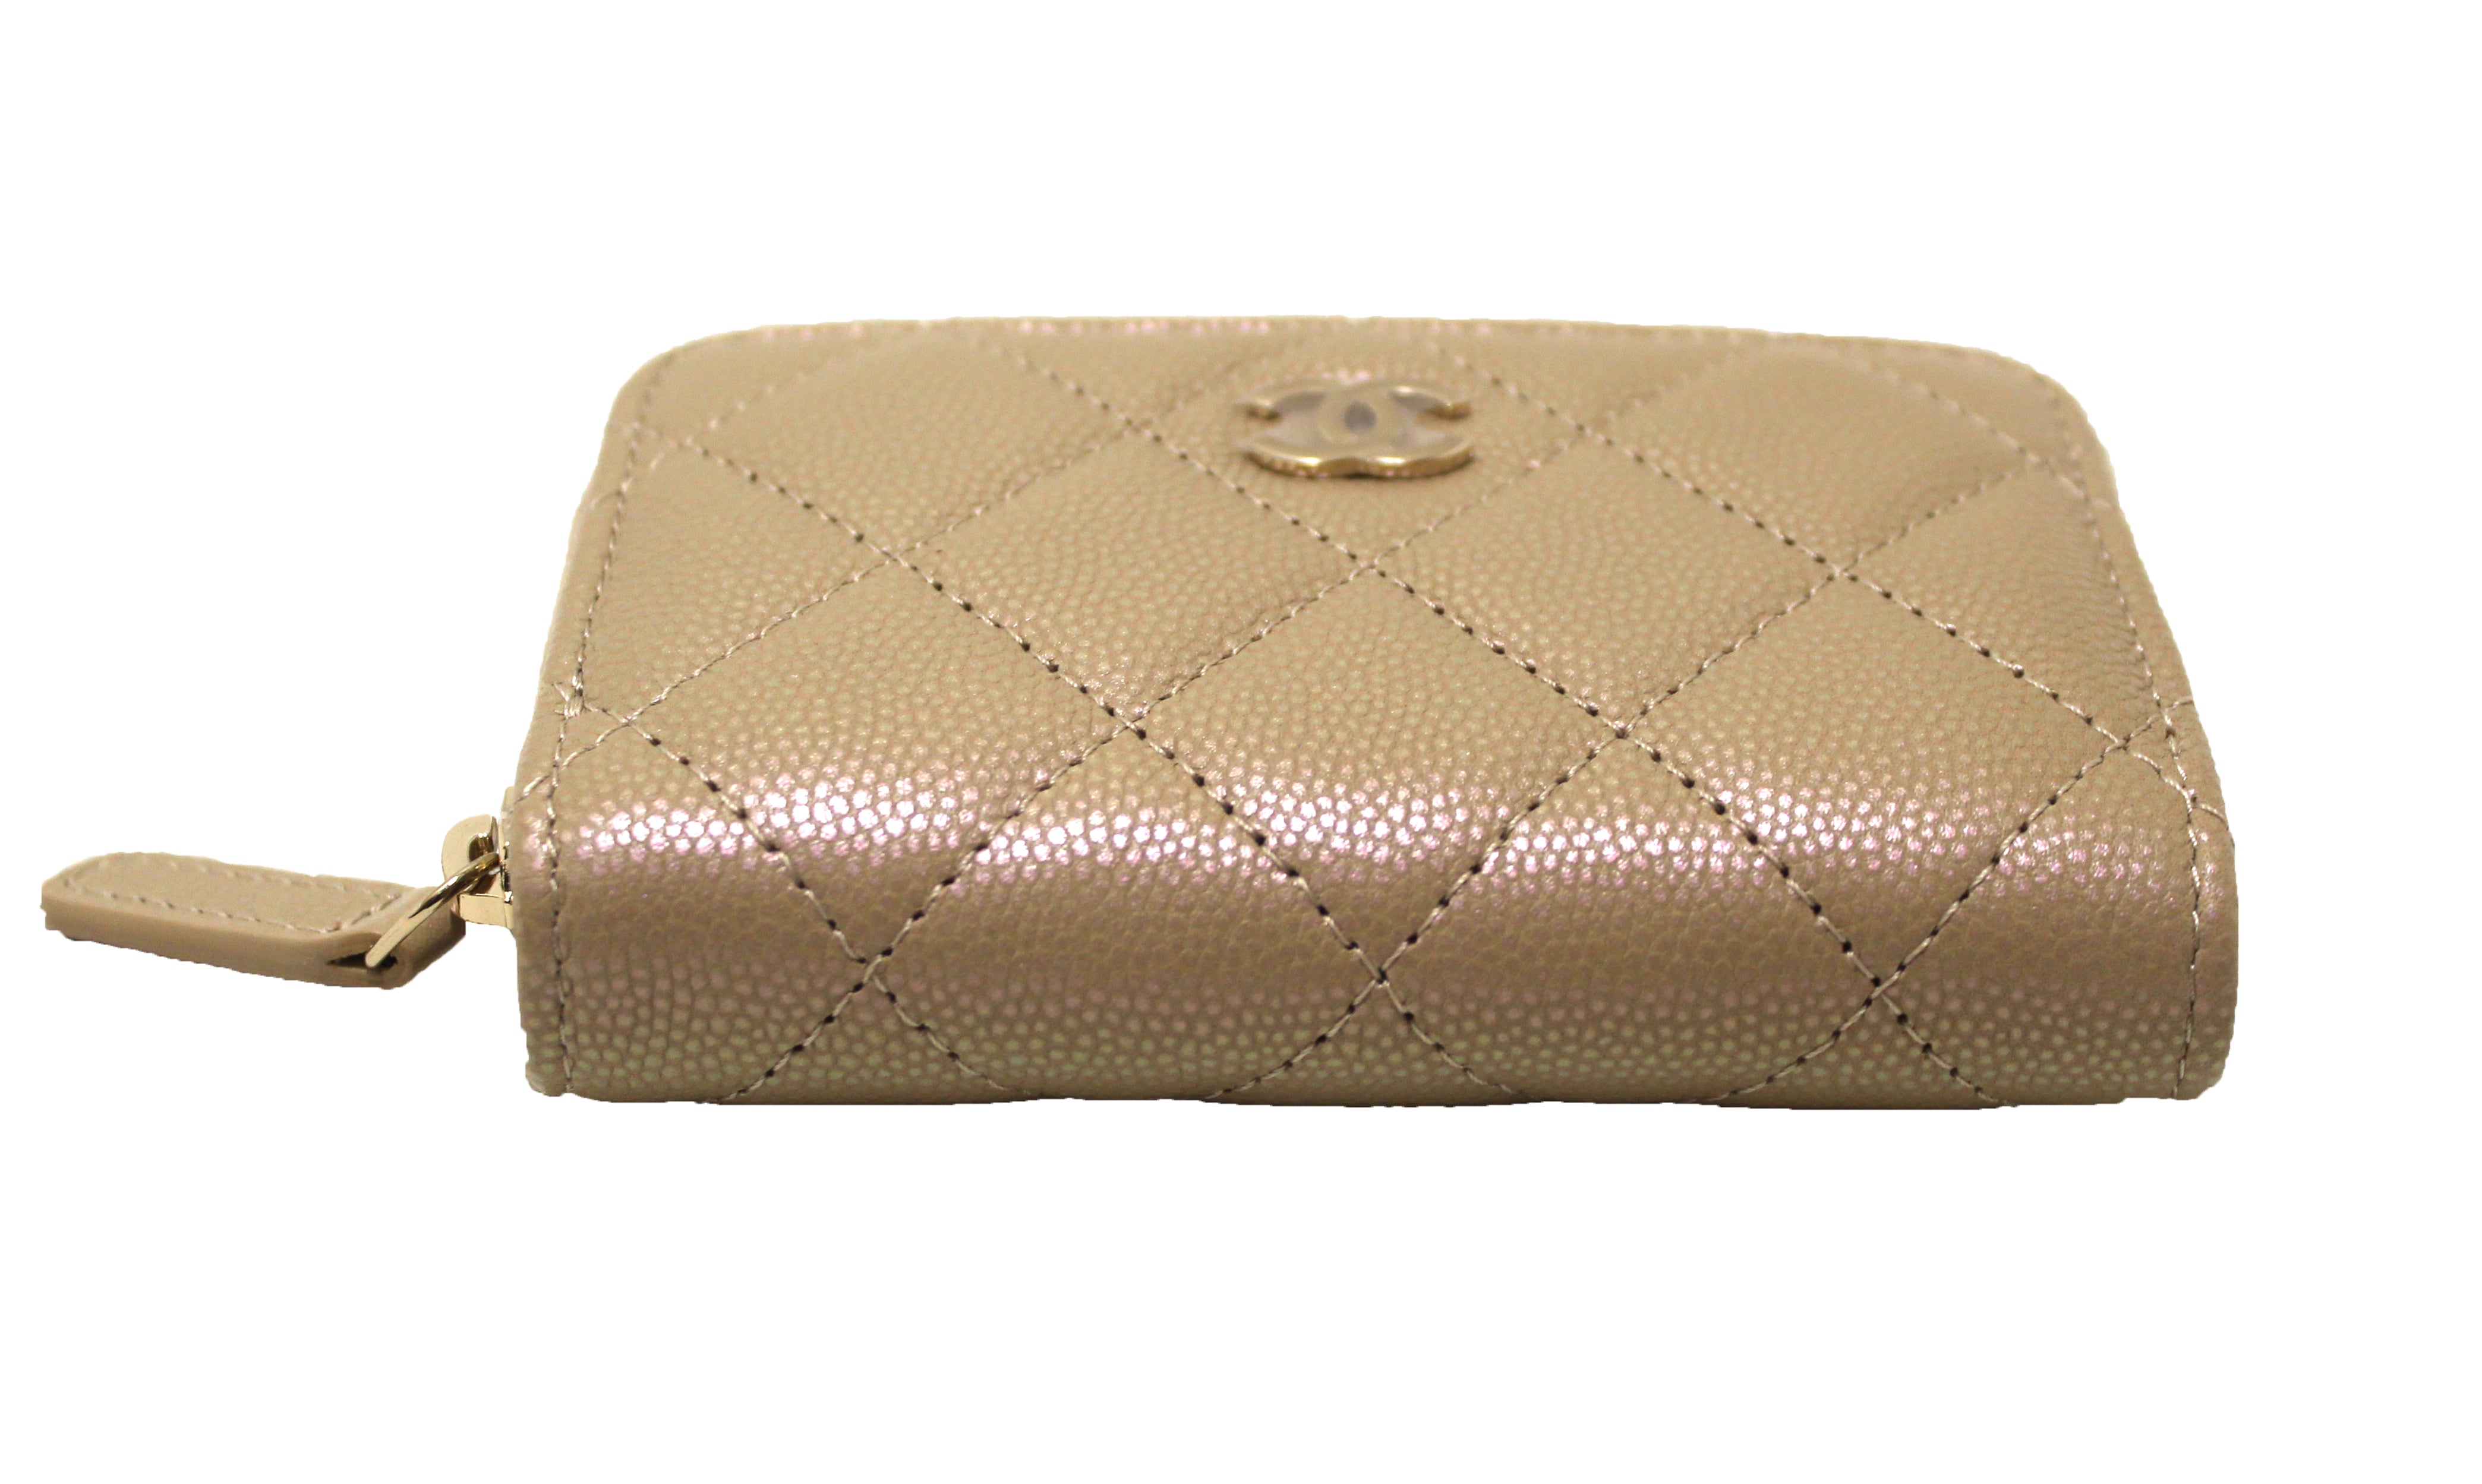 Authentic NEW Chanel Iridescent Dark Beige Quilted Caviar Leather Classic Zipped Coin Purse